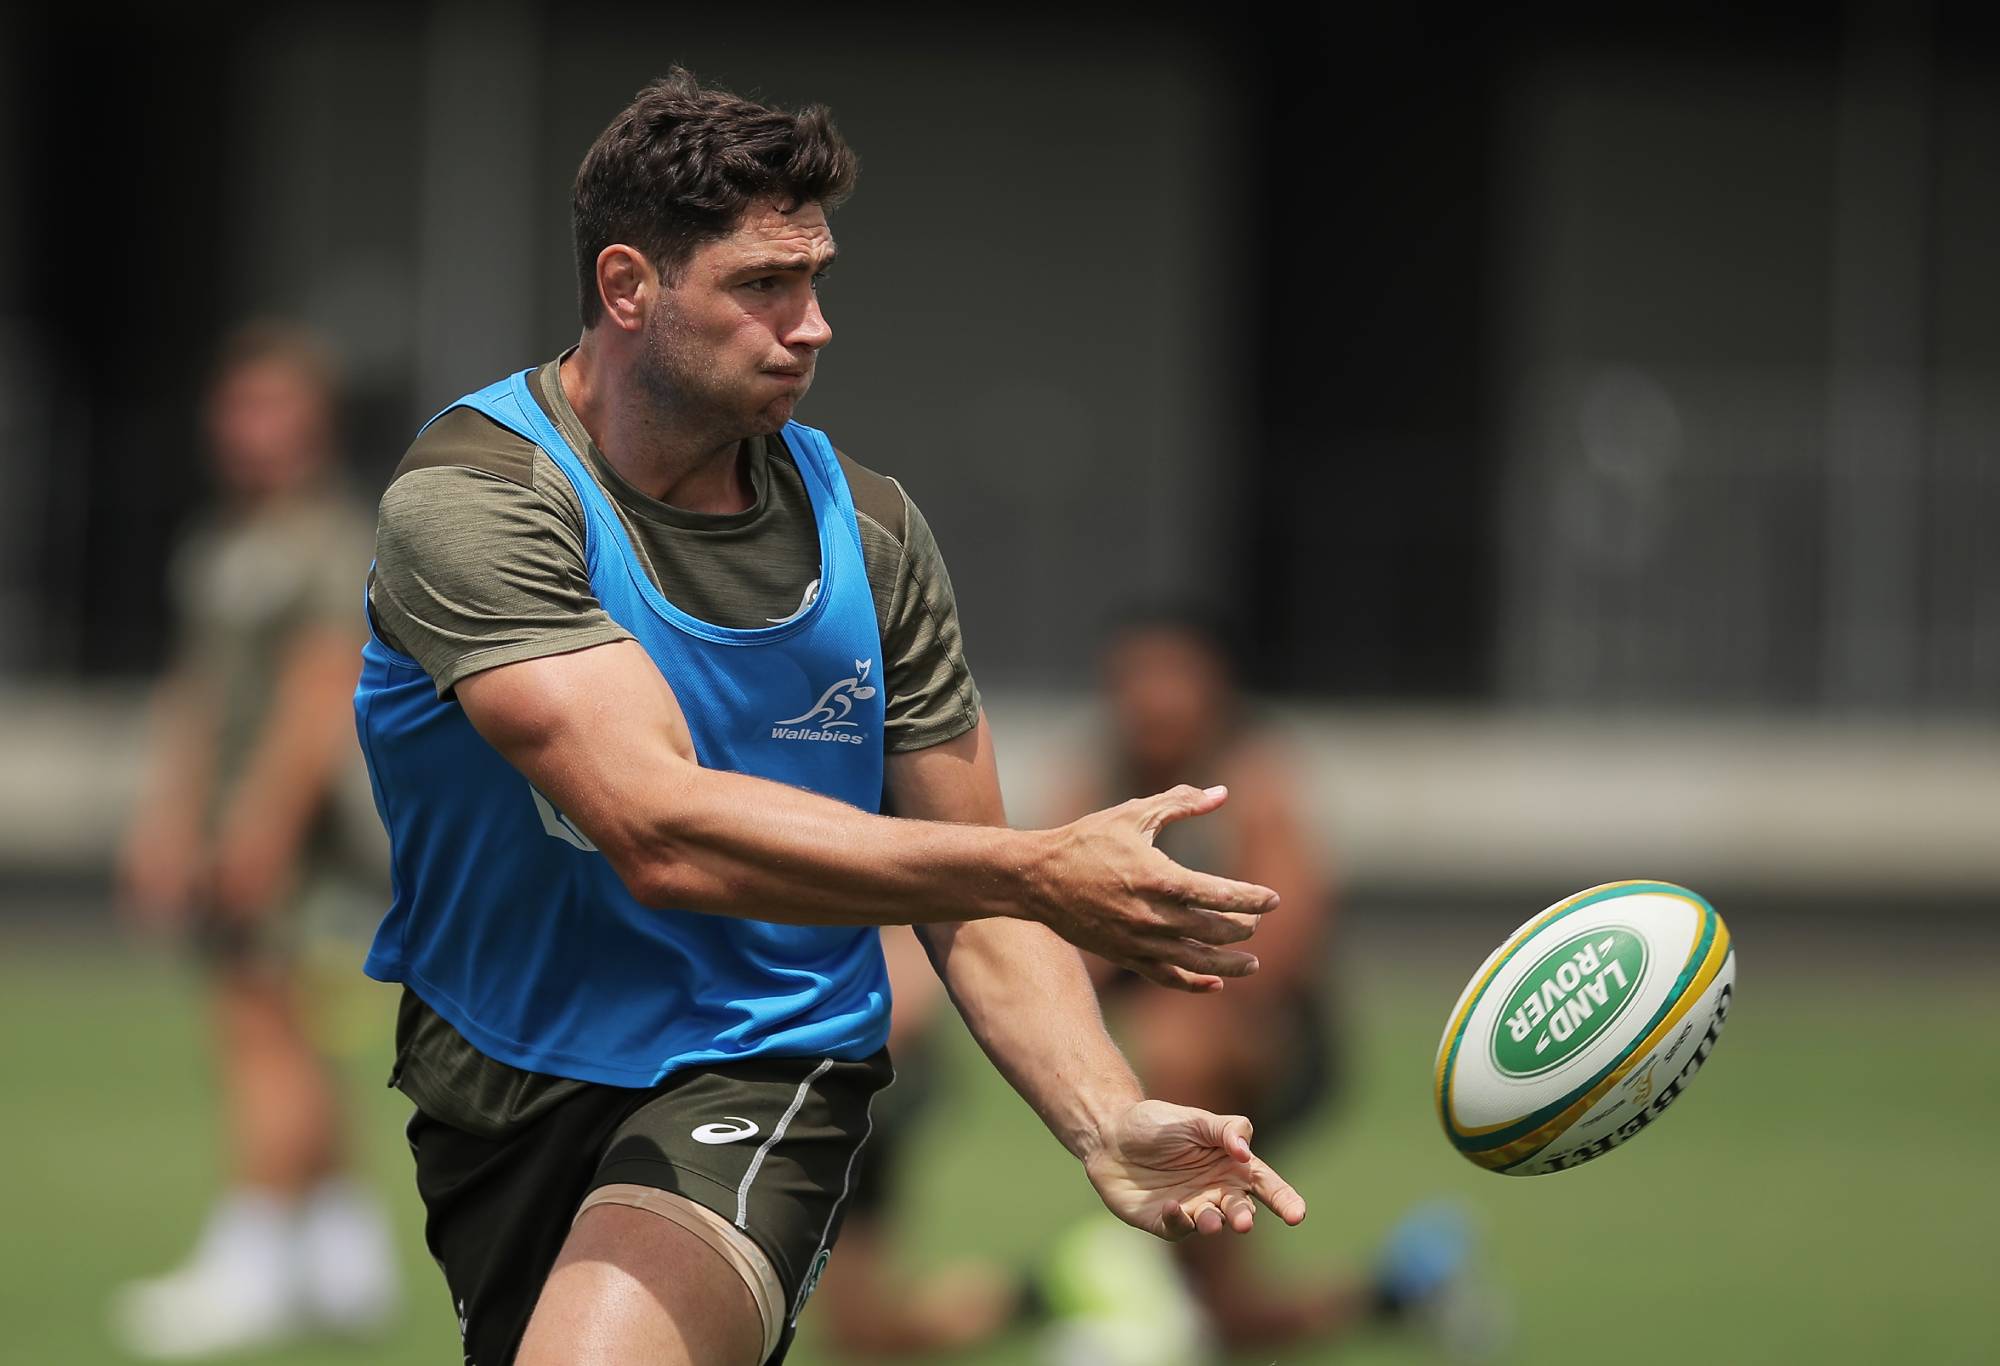 Rob Simmons passes during the Australian Wallabies training session at David Phillips Sports Complex on November 24, 2020 in Sydney, Australia. (Photo by Matt King/Getty Images)